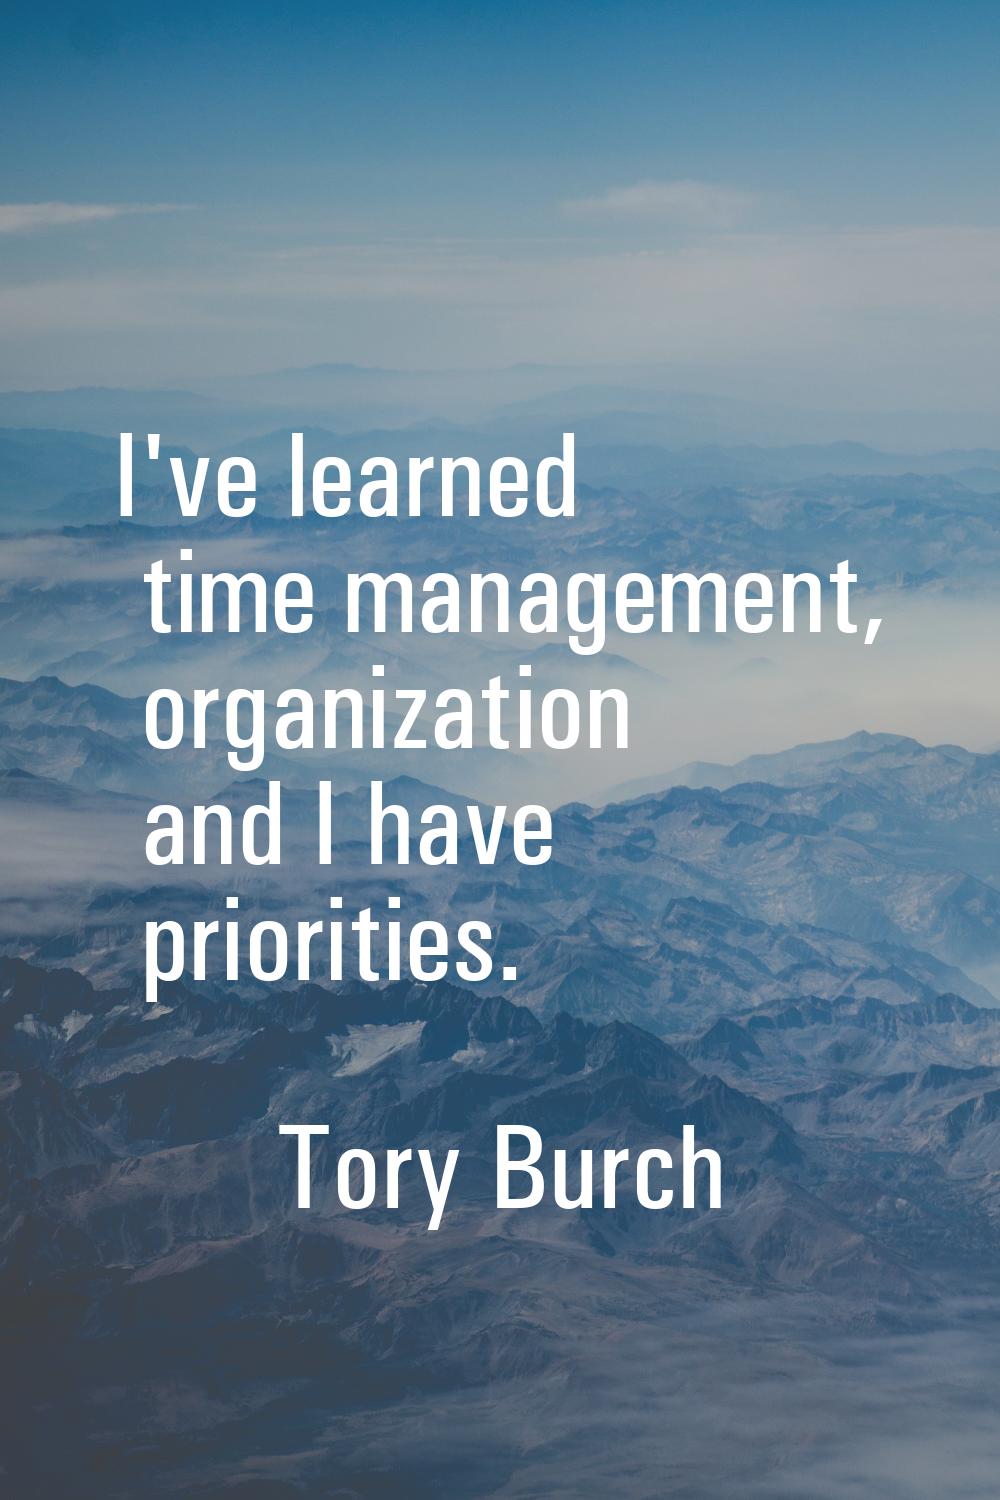 I've learned time management, organization and I have priorities.